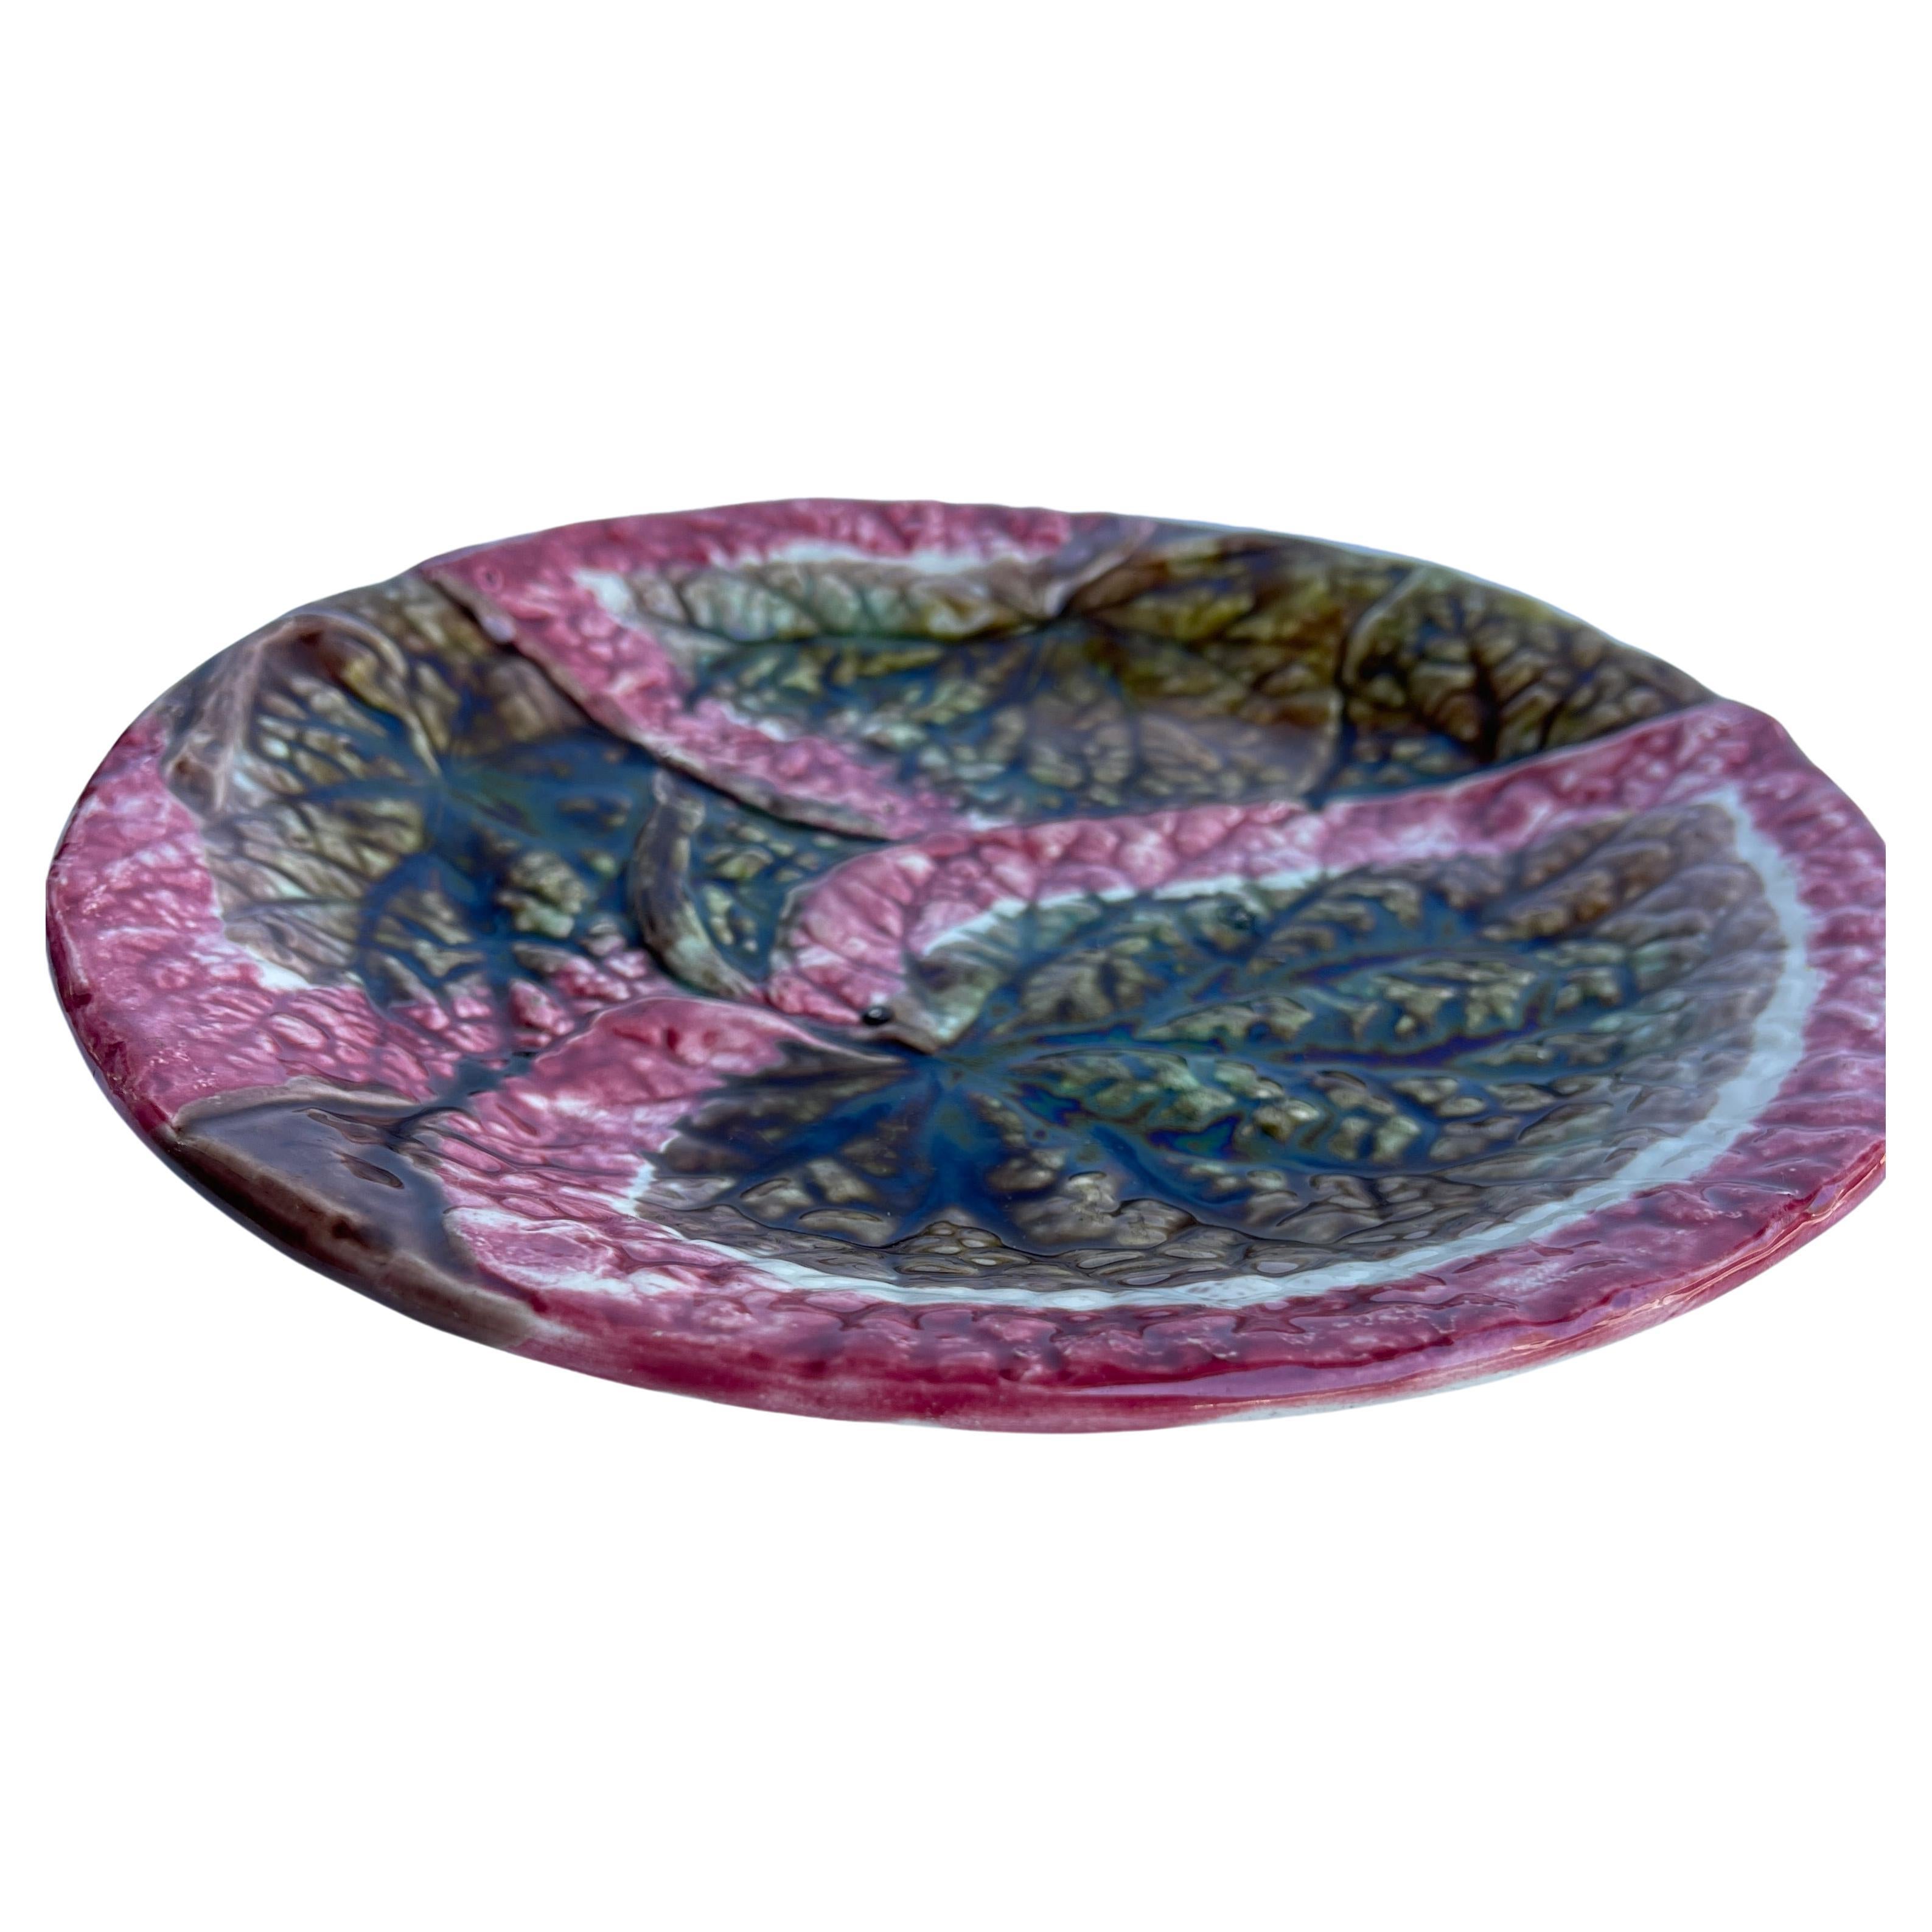 Rustic 19th Century Majolica Red Green Begonia Leaf Plate, England For Sale